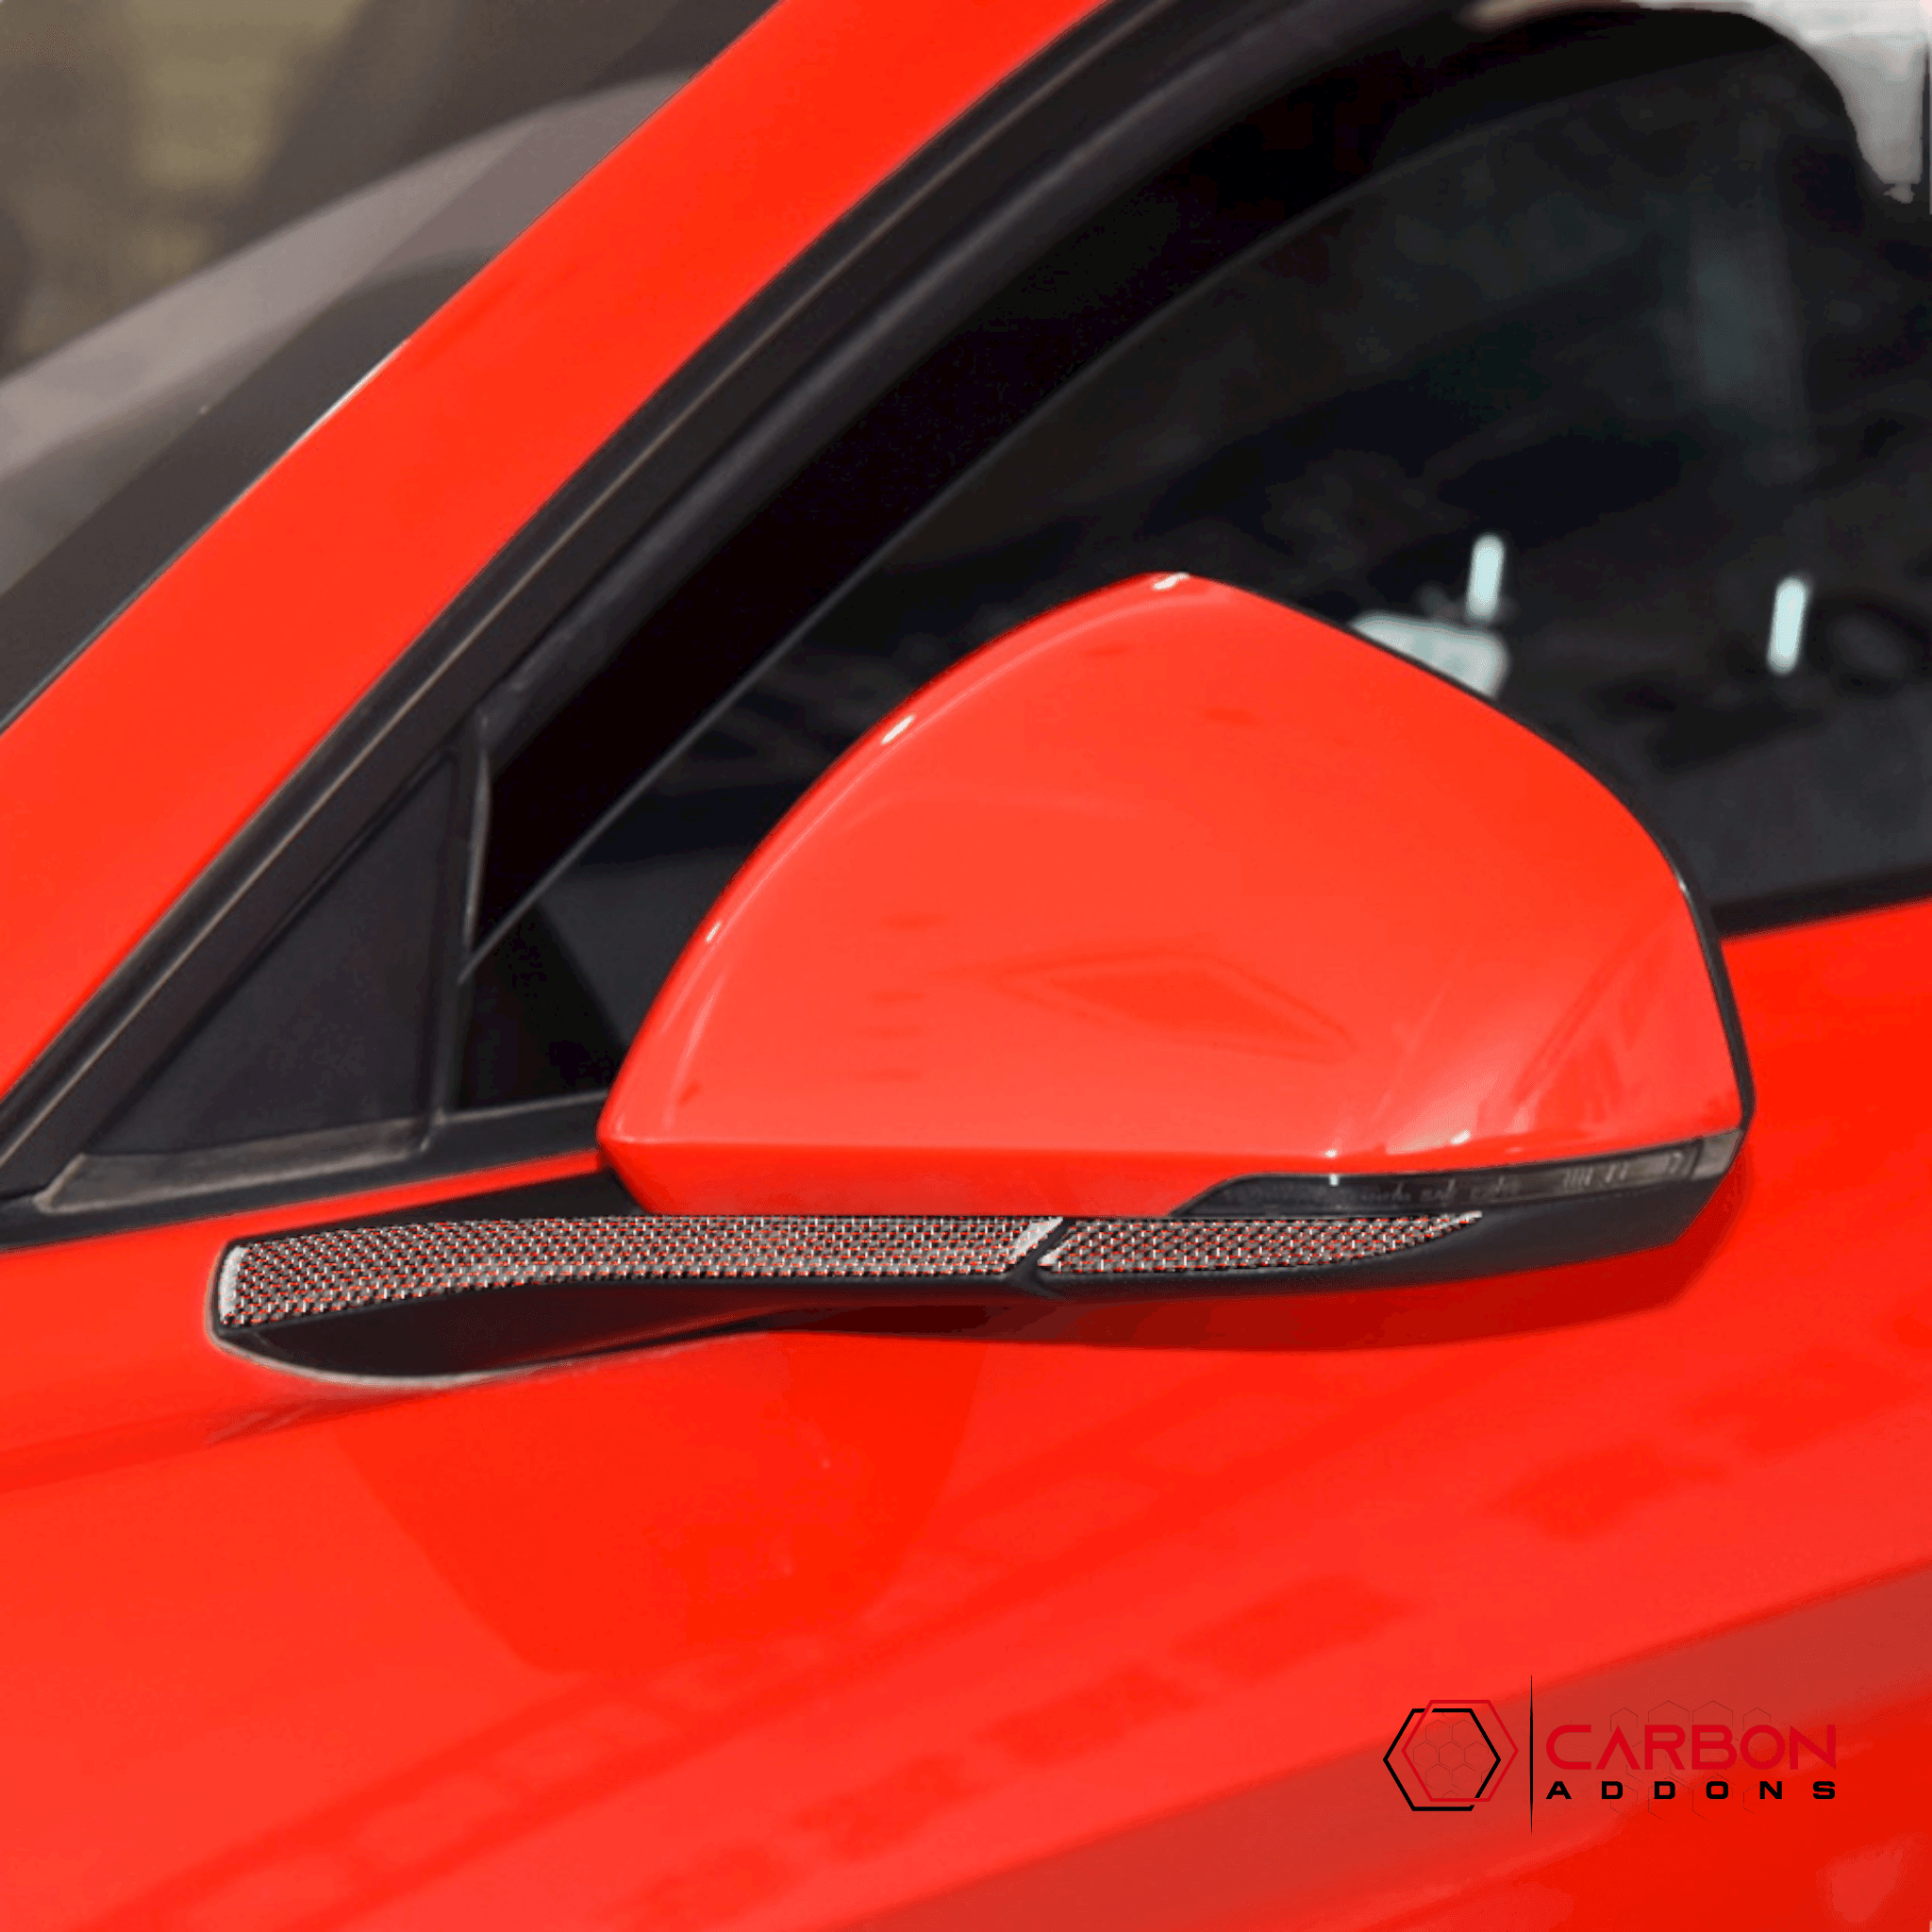 Reflective Carbon Fiber Rear View Mirror Trim Overlay For Ford Mustang 2015-2023 - carbonaddons Carbon Fiber Parts, Accessories, Upgrades, Mods